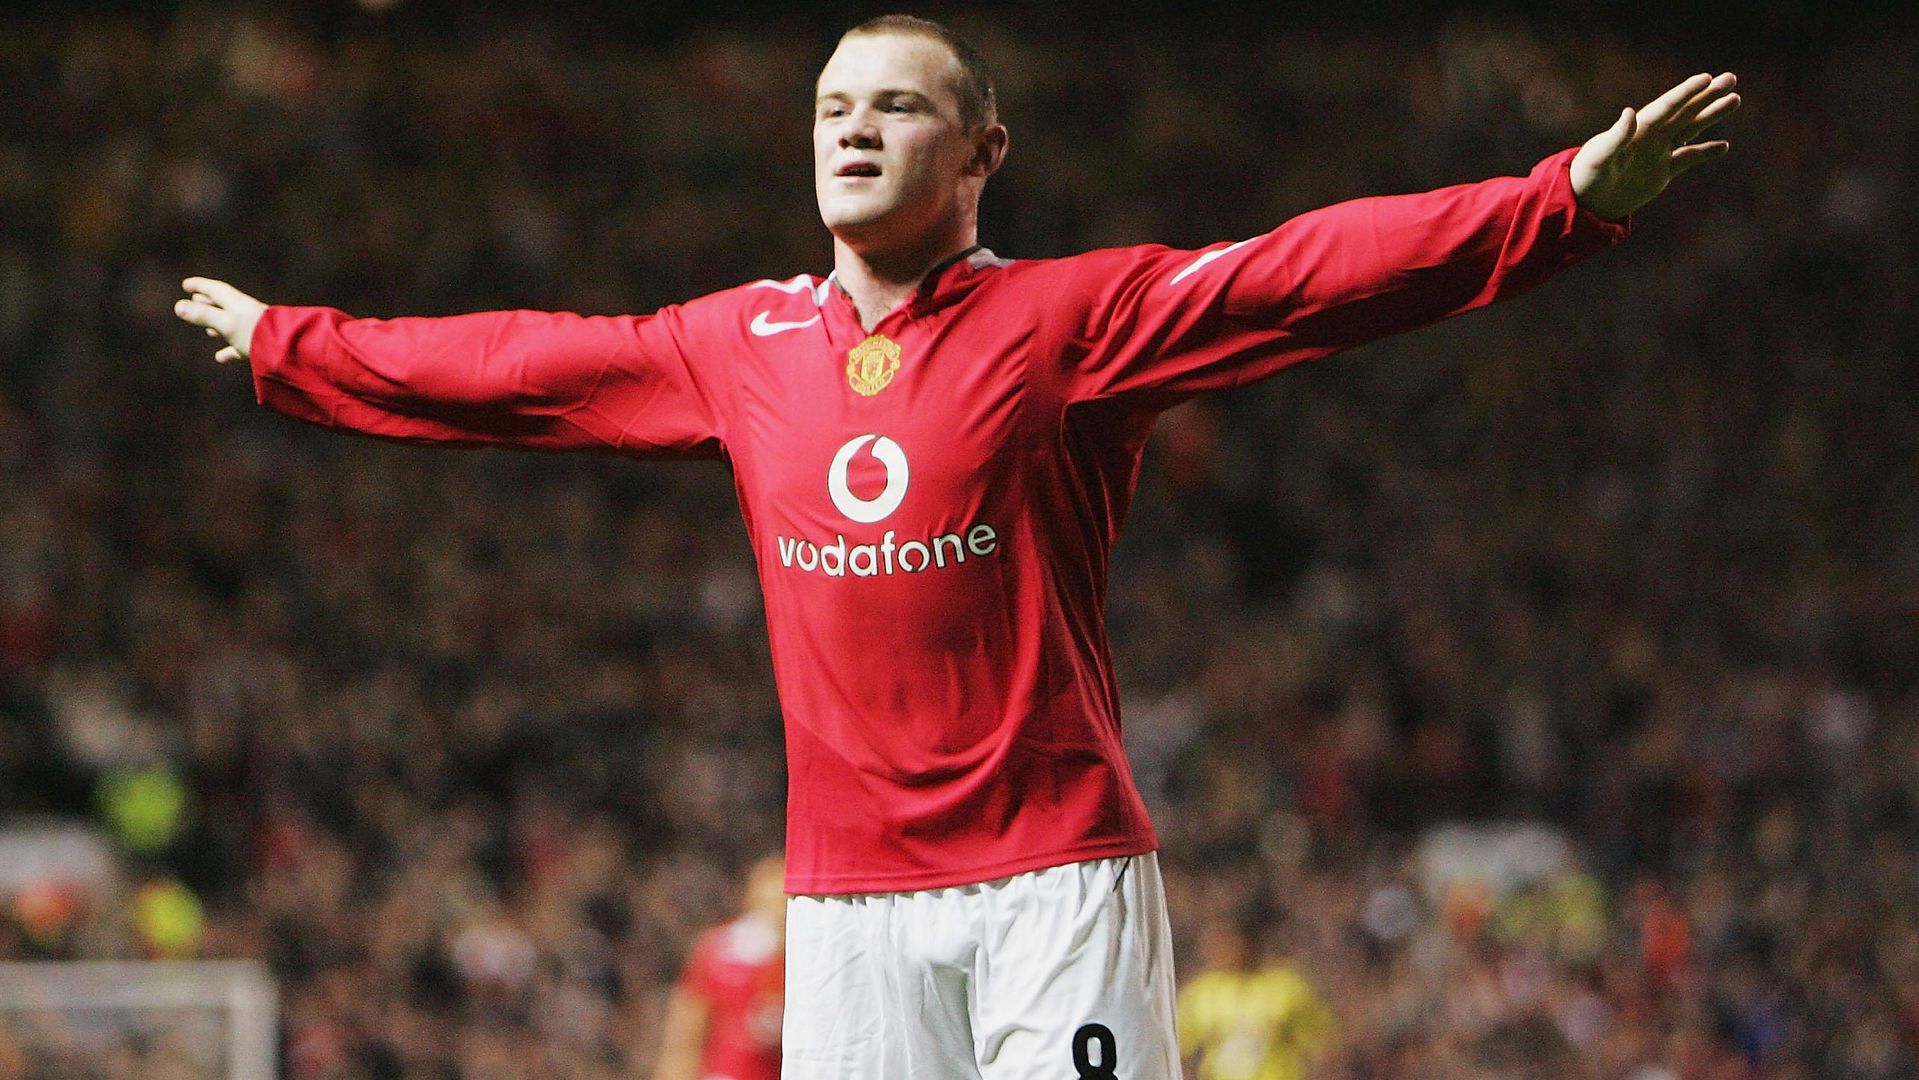 UTD Podcast, Why Rooney's debut shirt was ripped